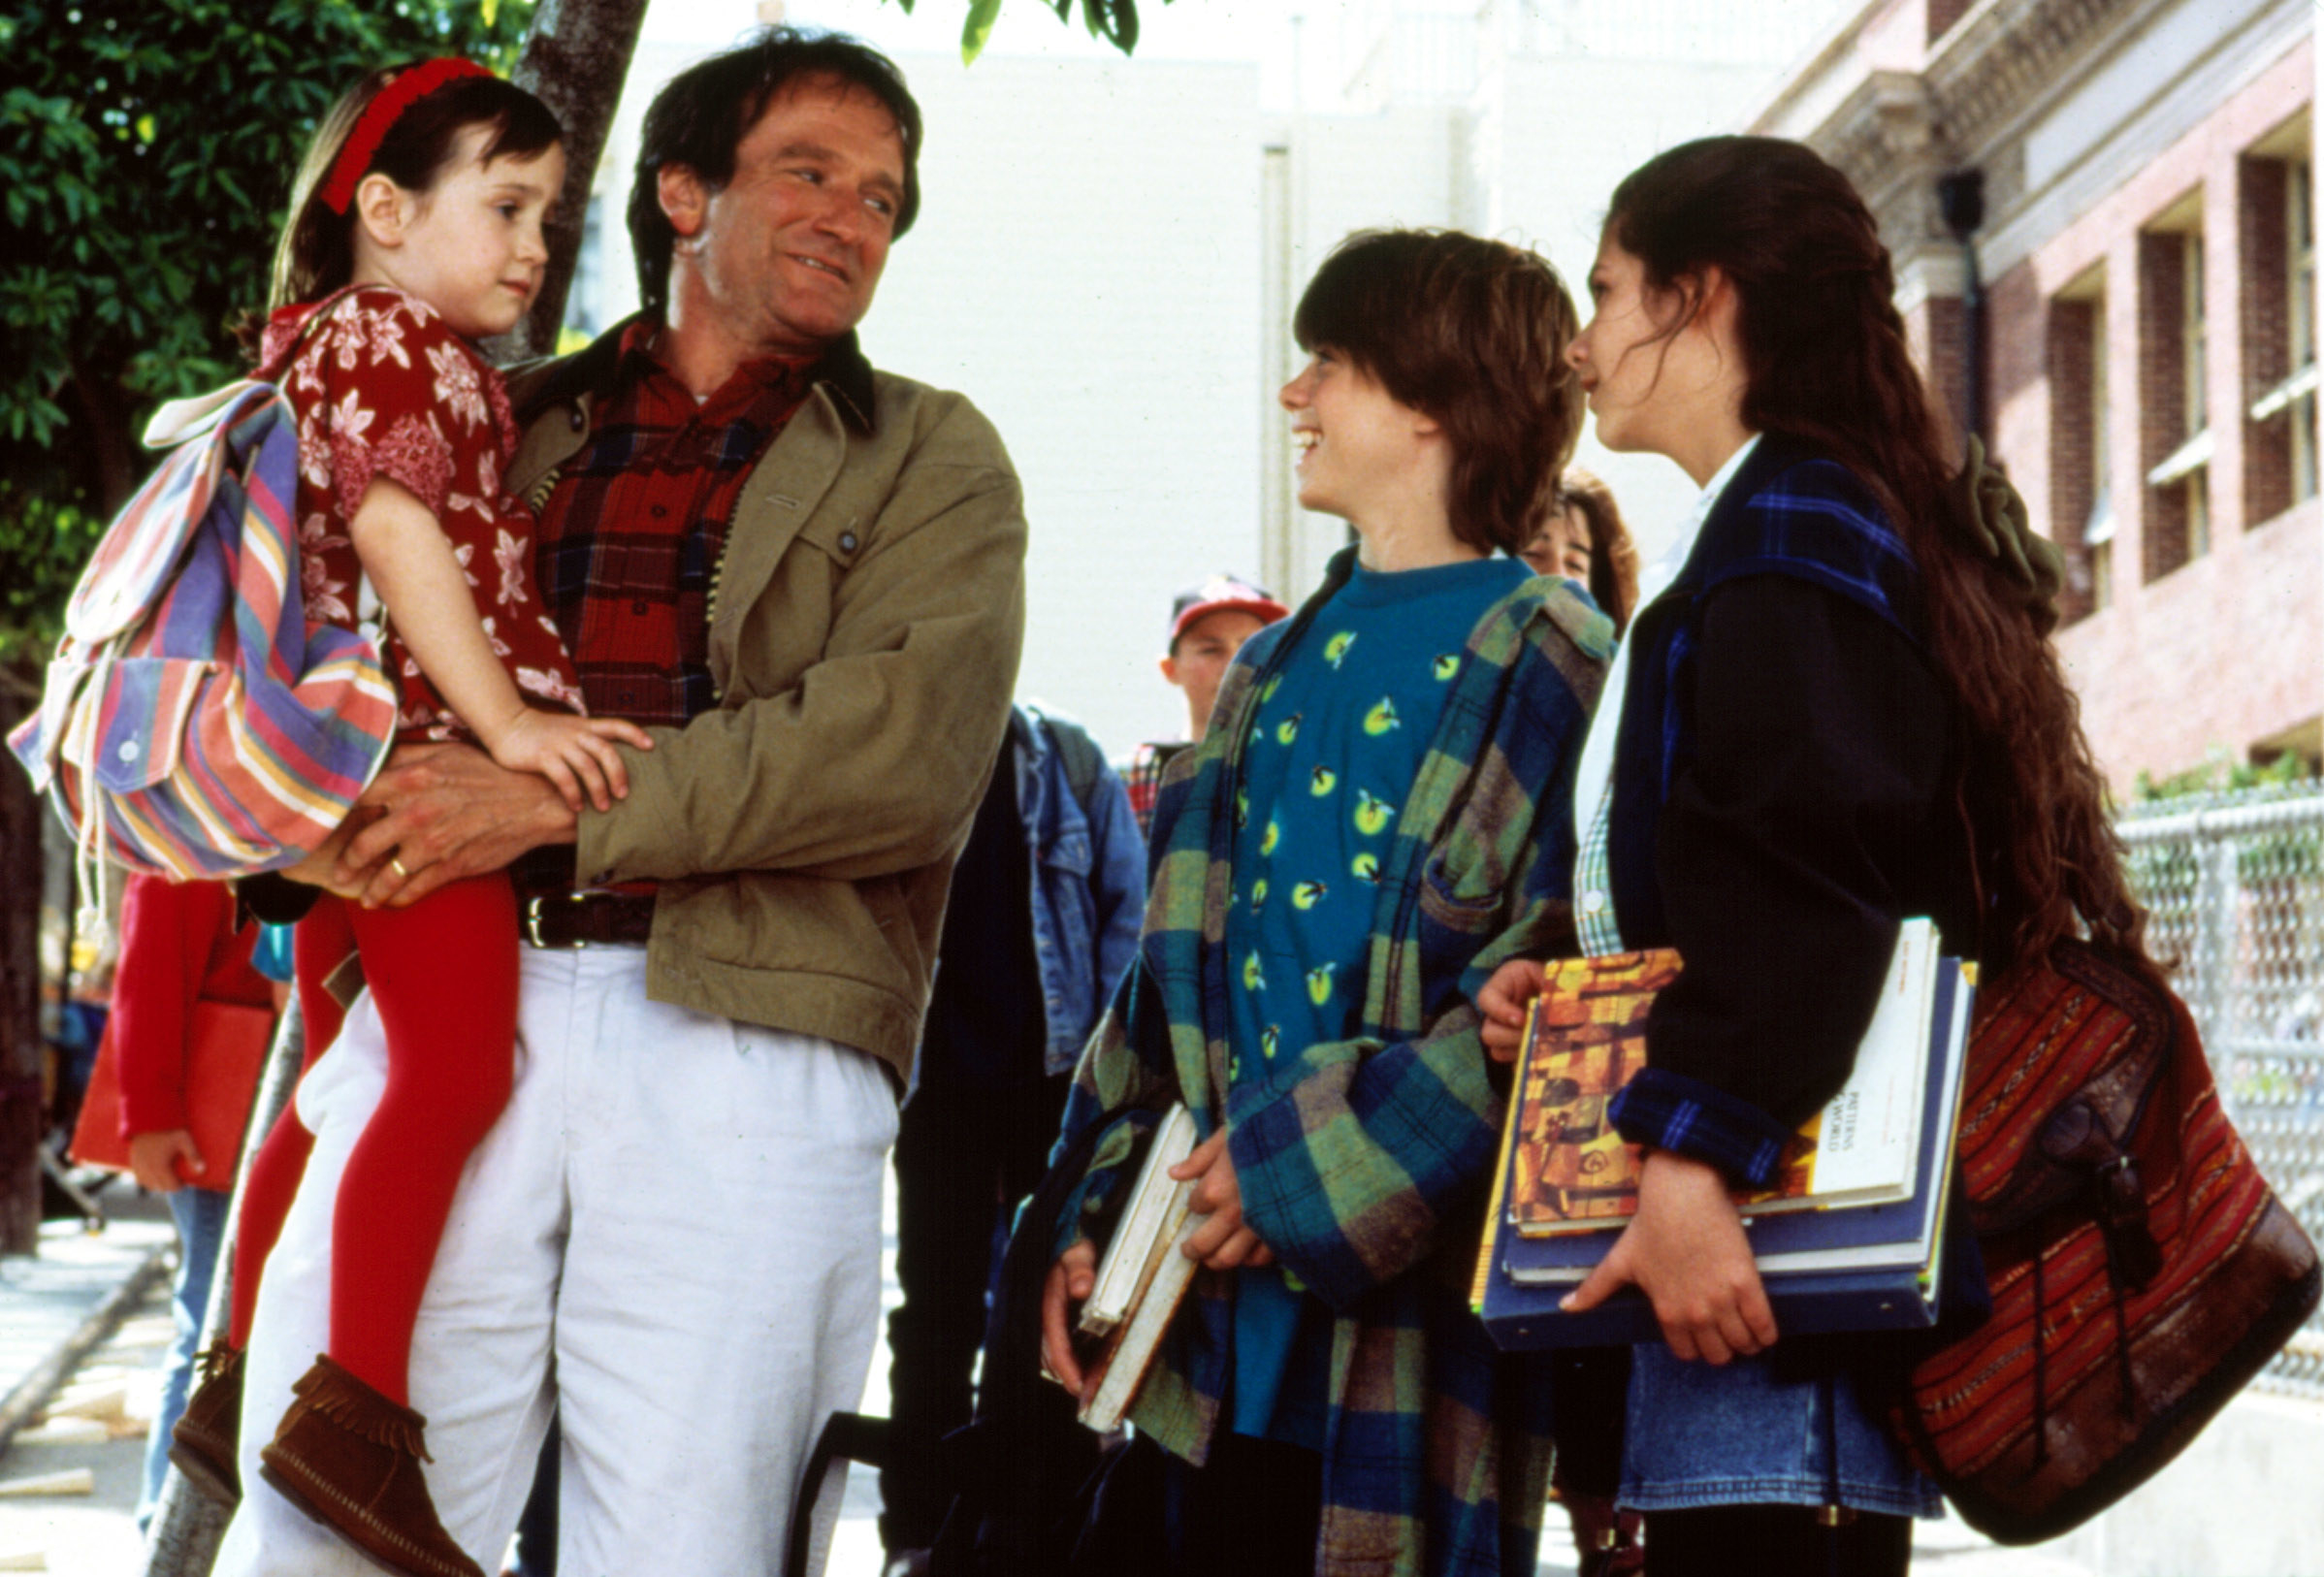 Robin Williams carrying Mara Wilson as he stands next to Matthew Lawrence and Lisa Jakub in a scene from Mrs. Doubtfire